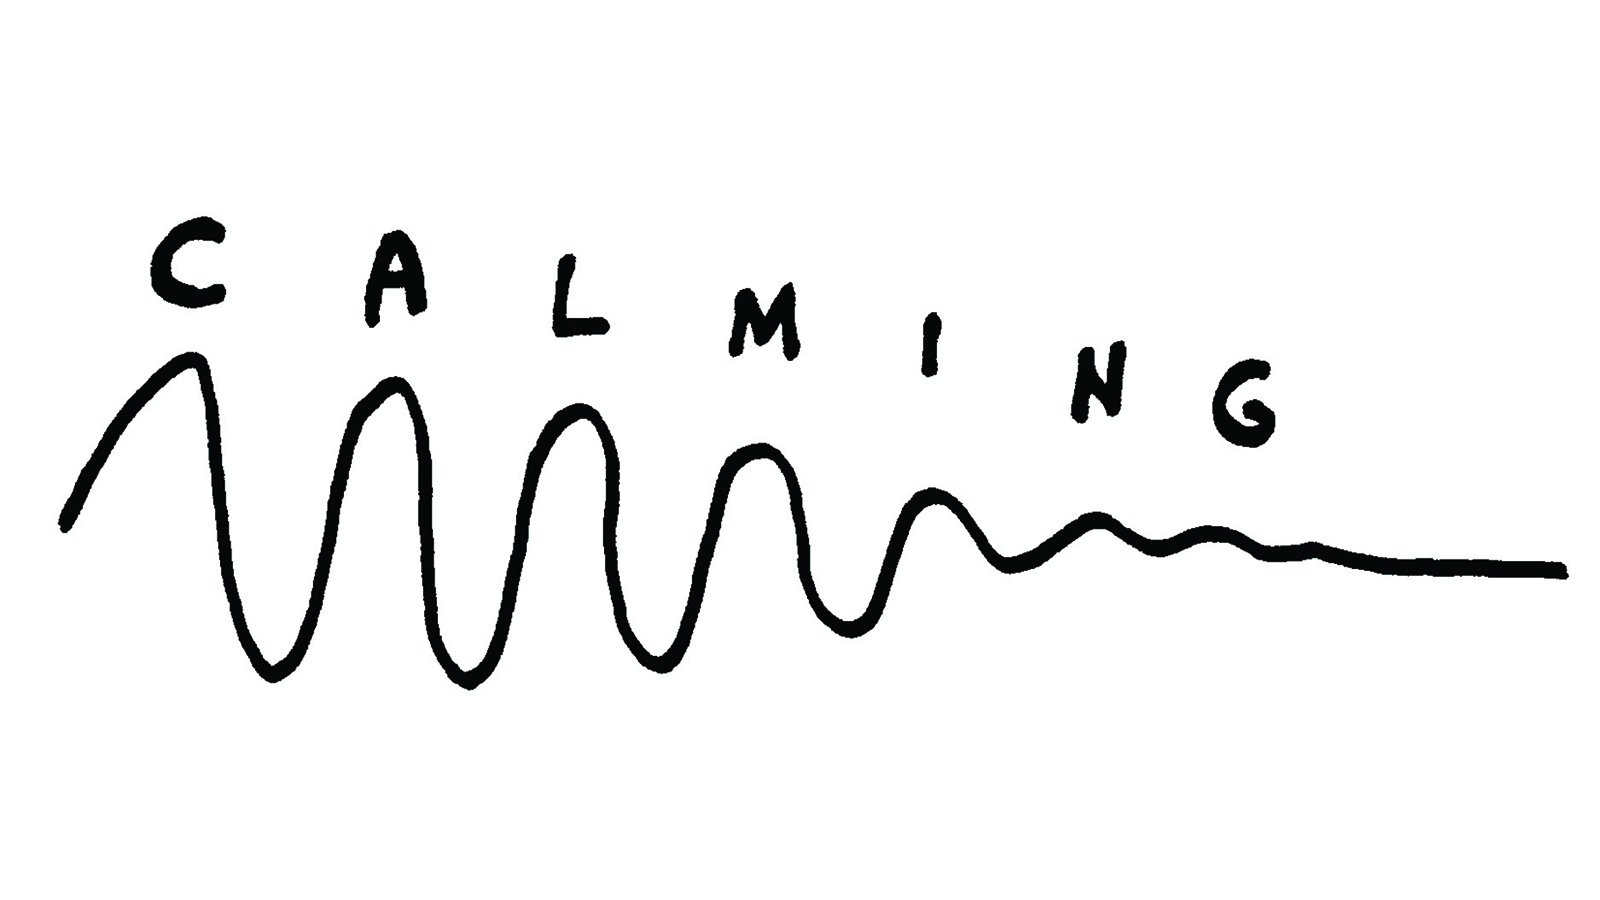 Graphic featuring the text "calming" with a squiggly line running underneath.